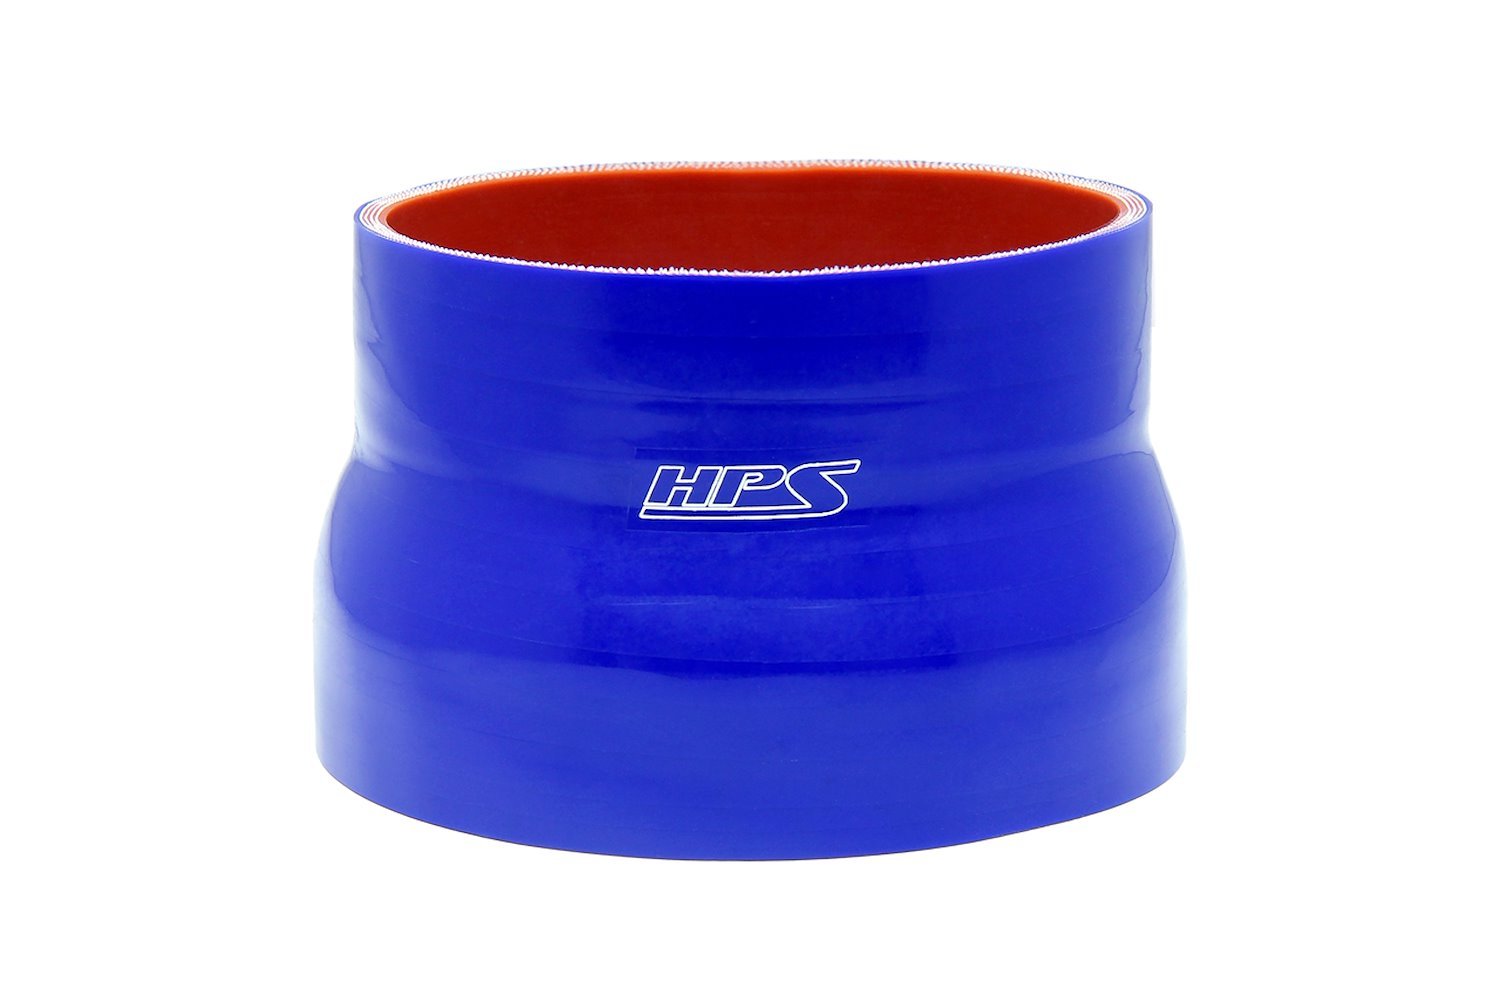 HTSR-350-375-BLUE Silicone Reducer Hose, High-Temp 4-Ply Reinforced, 3-1/2 in. - 3-3/4 in. ID, 3 in. Long, Blue